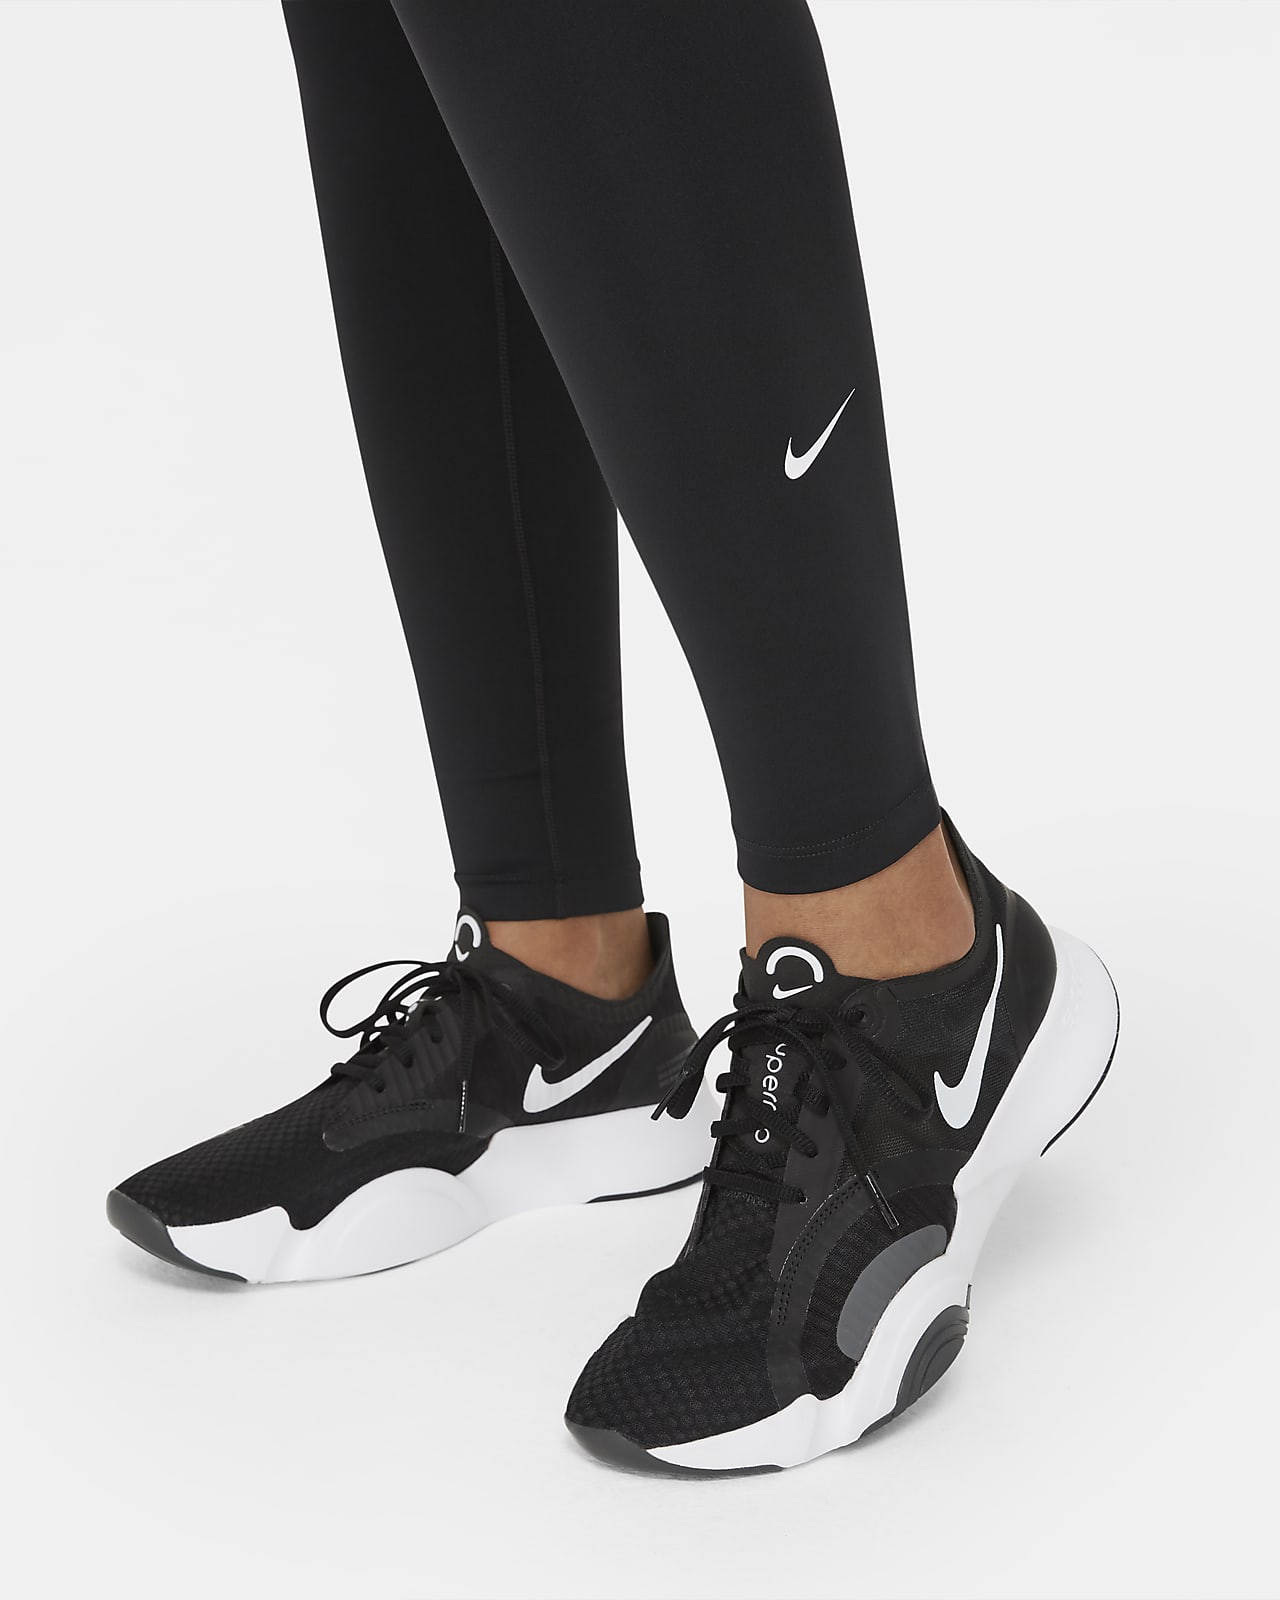 Nike One Mid-Rise 7/8 Tight Women